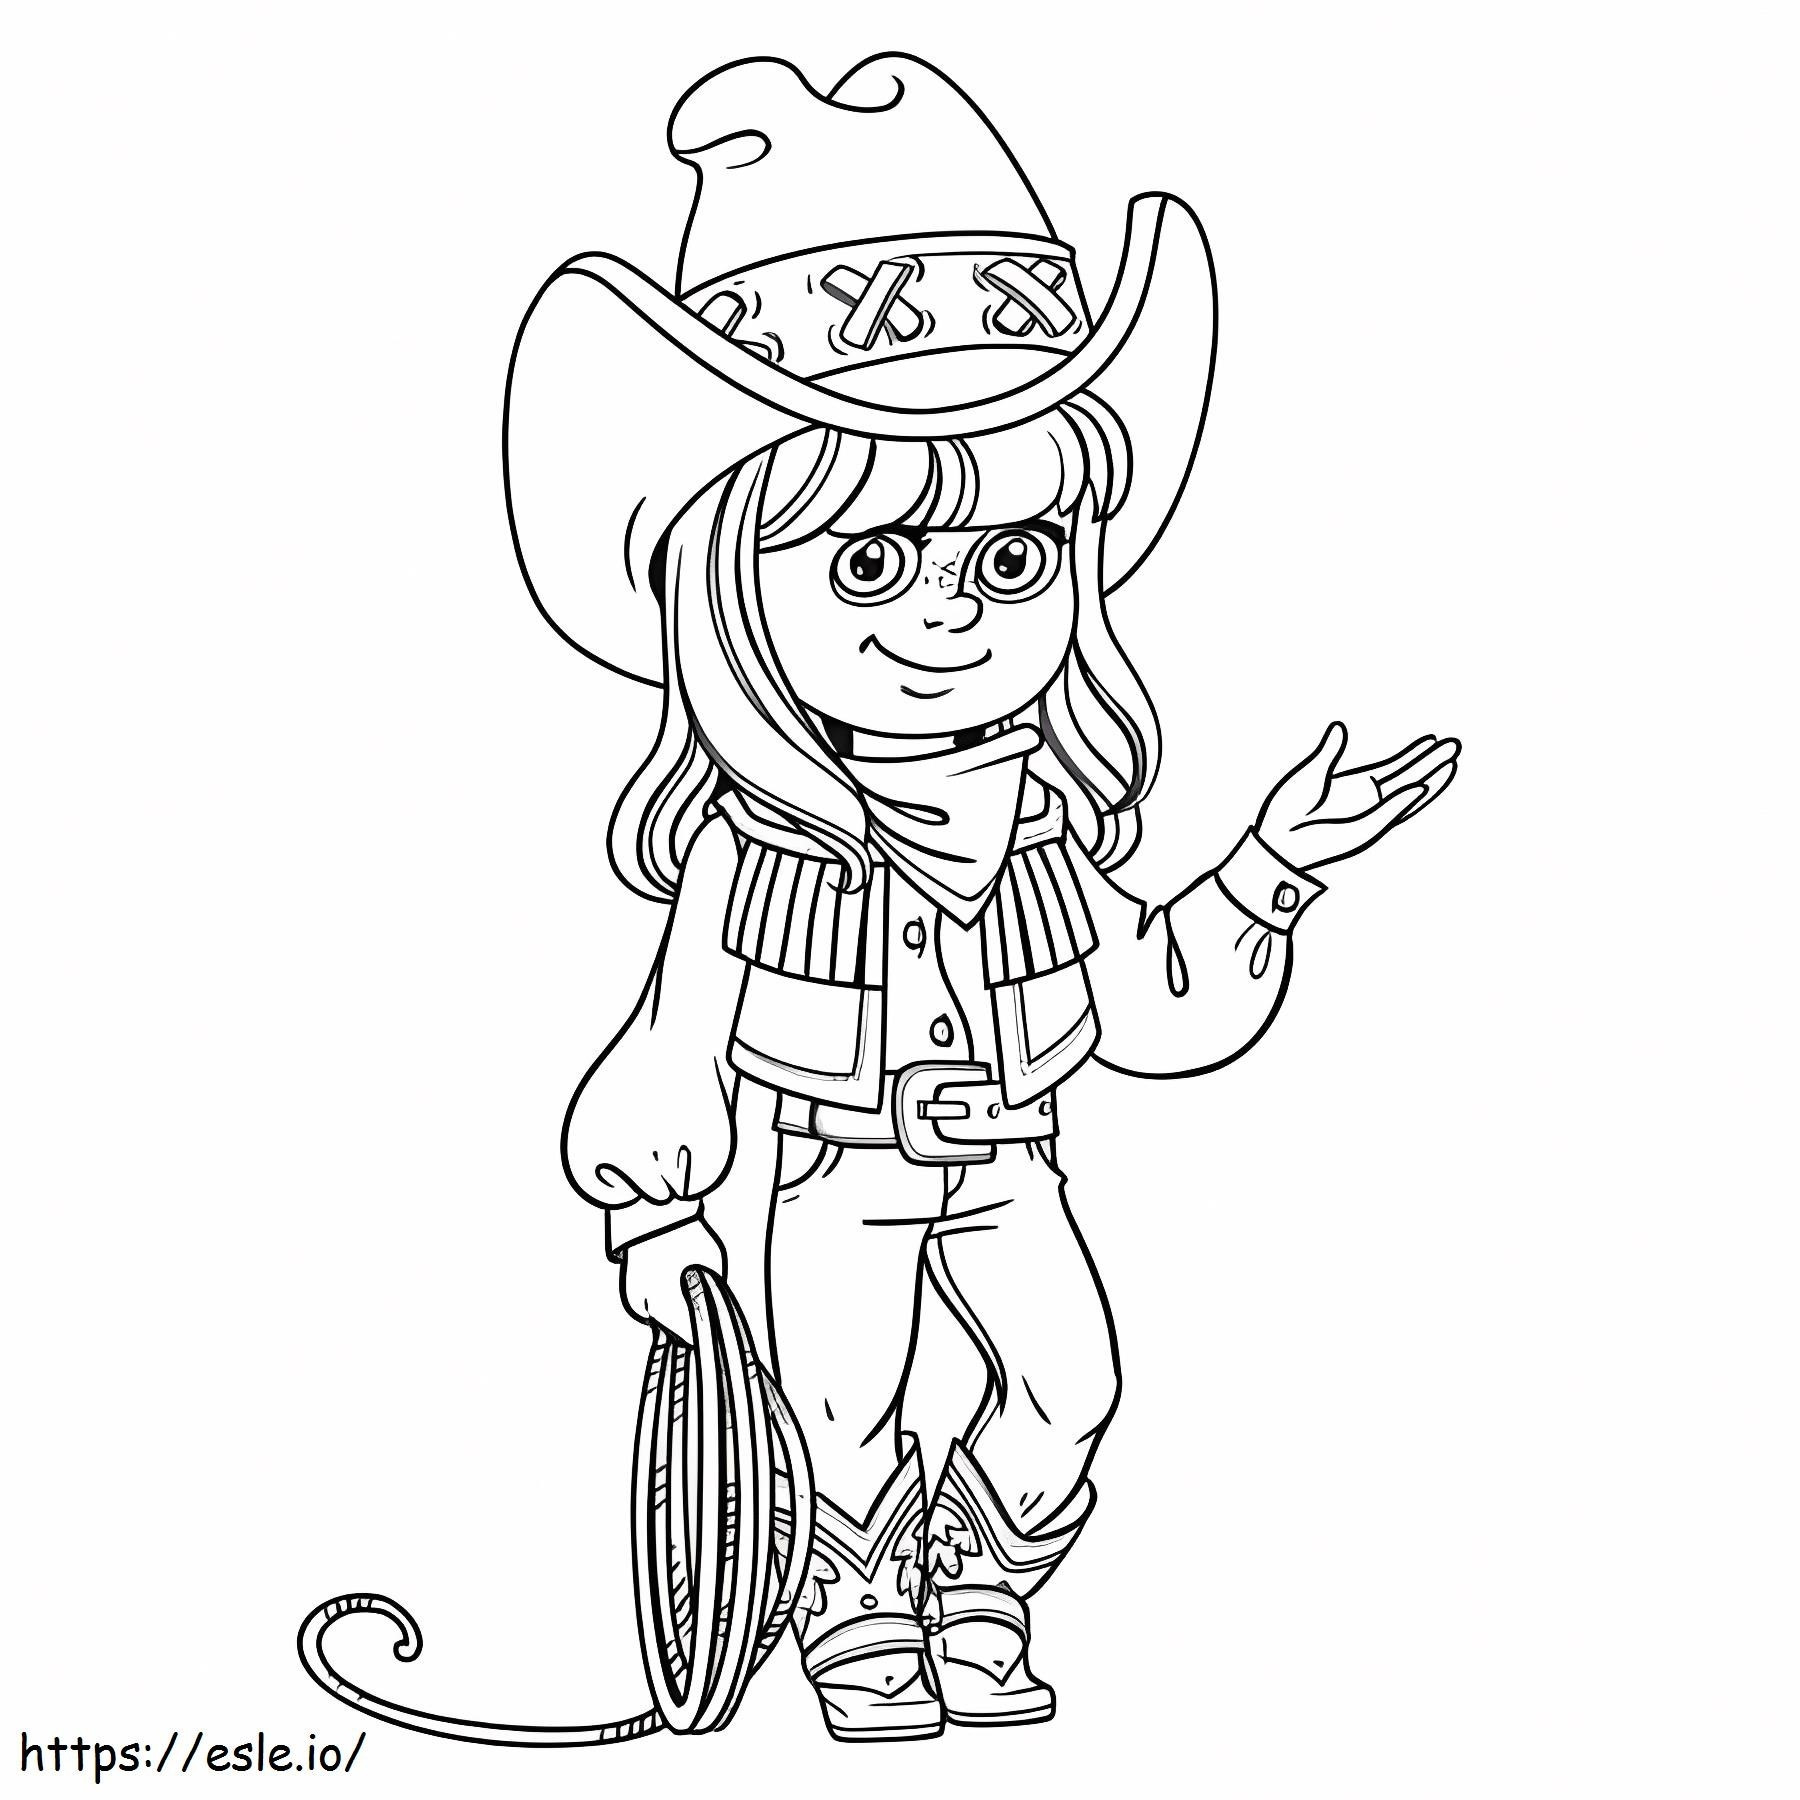 Cowgirl Printable coloring page